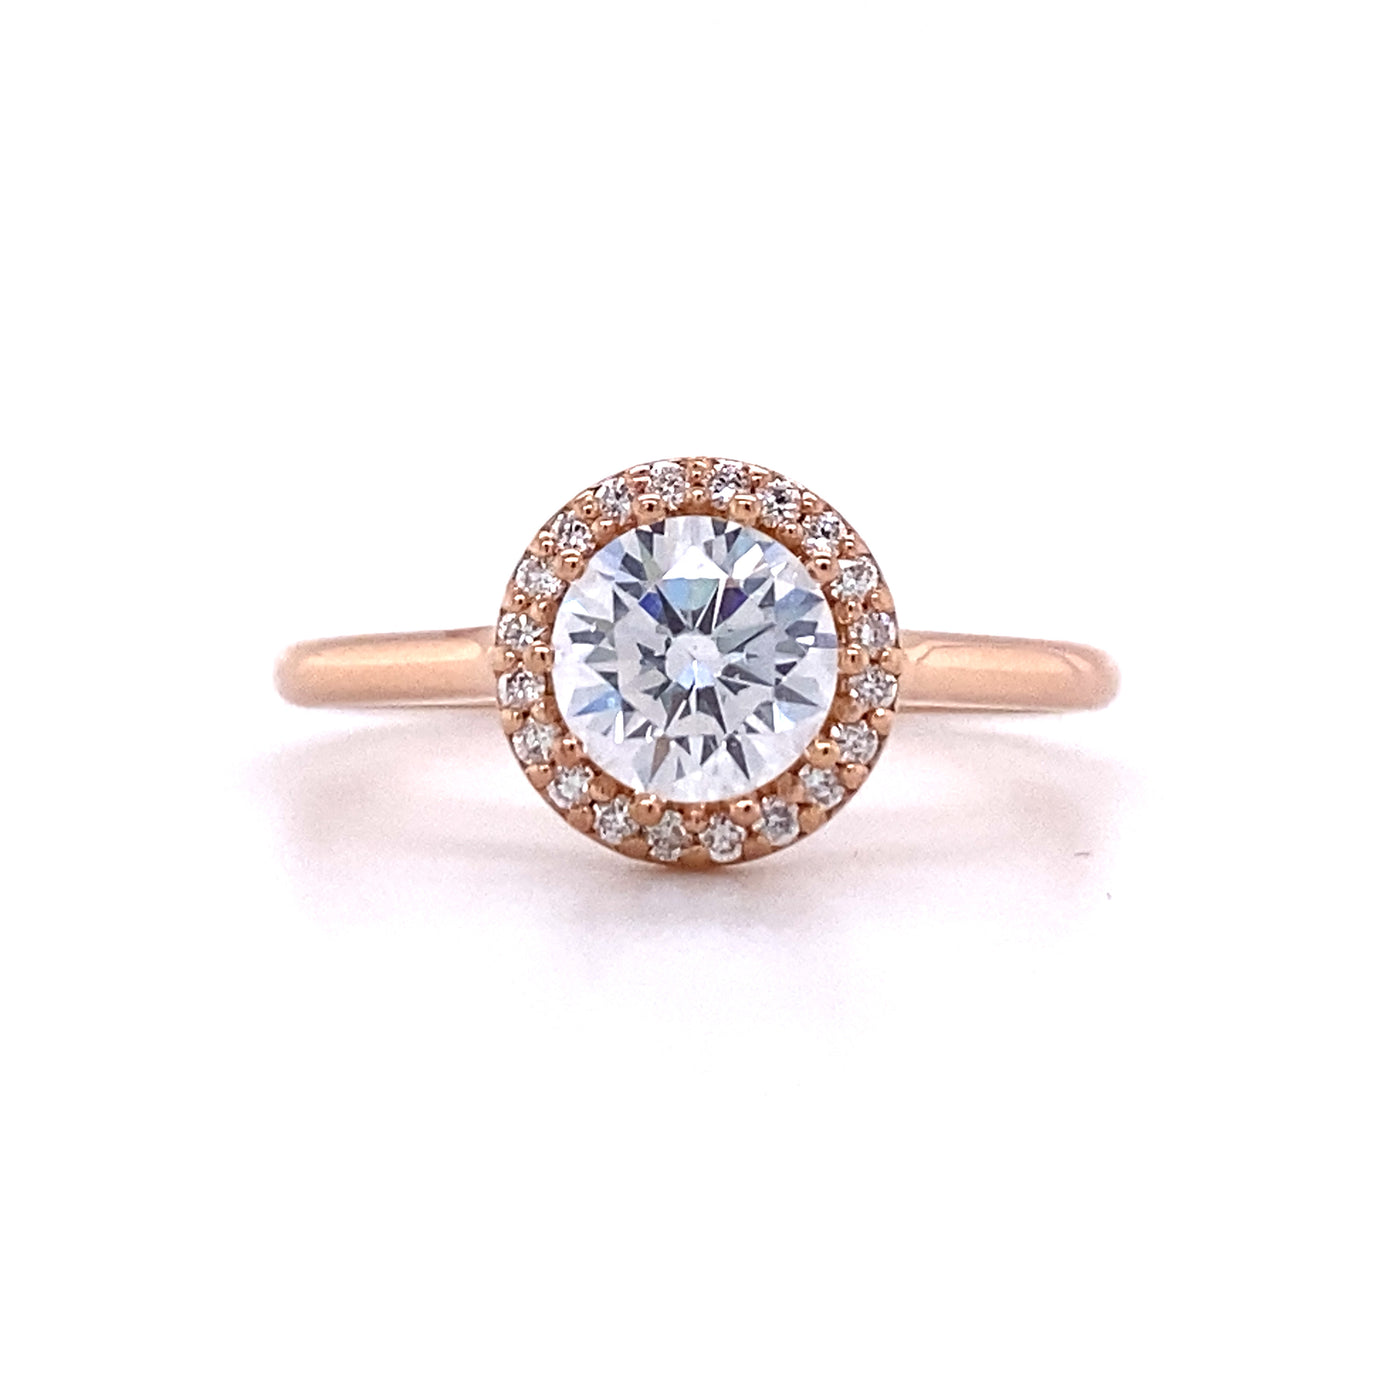 Beeghly & Co. 14 Karat Halo Round Shape Engagement Ring BCR-86